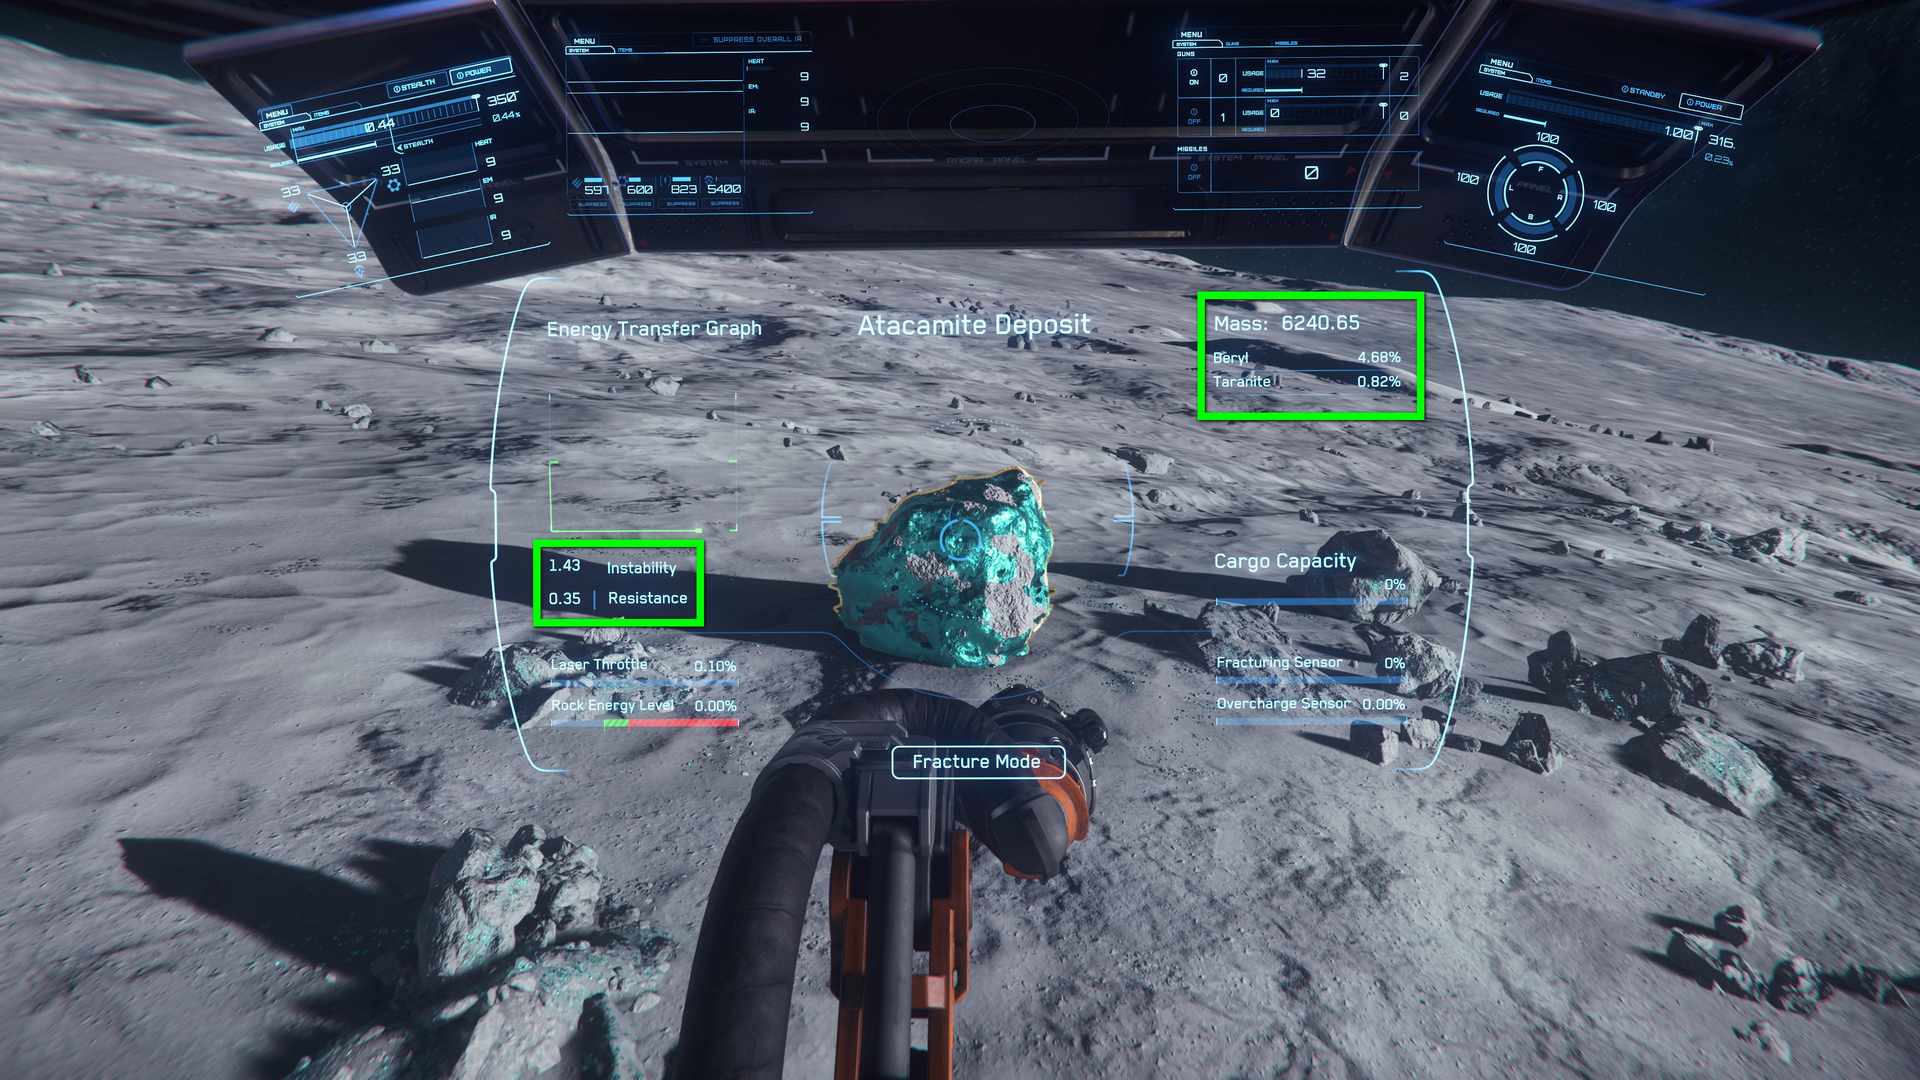 Star Citizen Receives Massive Update with New PvP Modes, Ships, and More